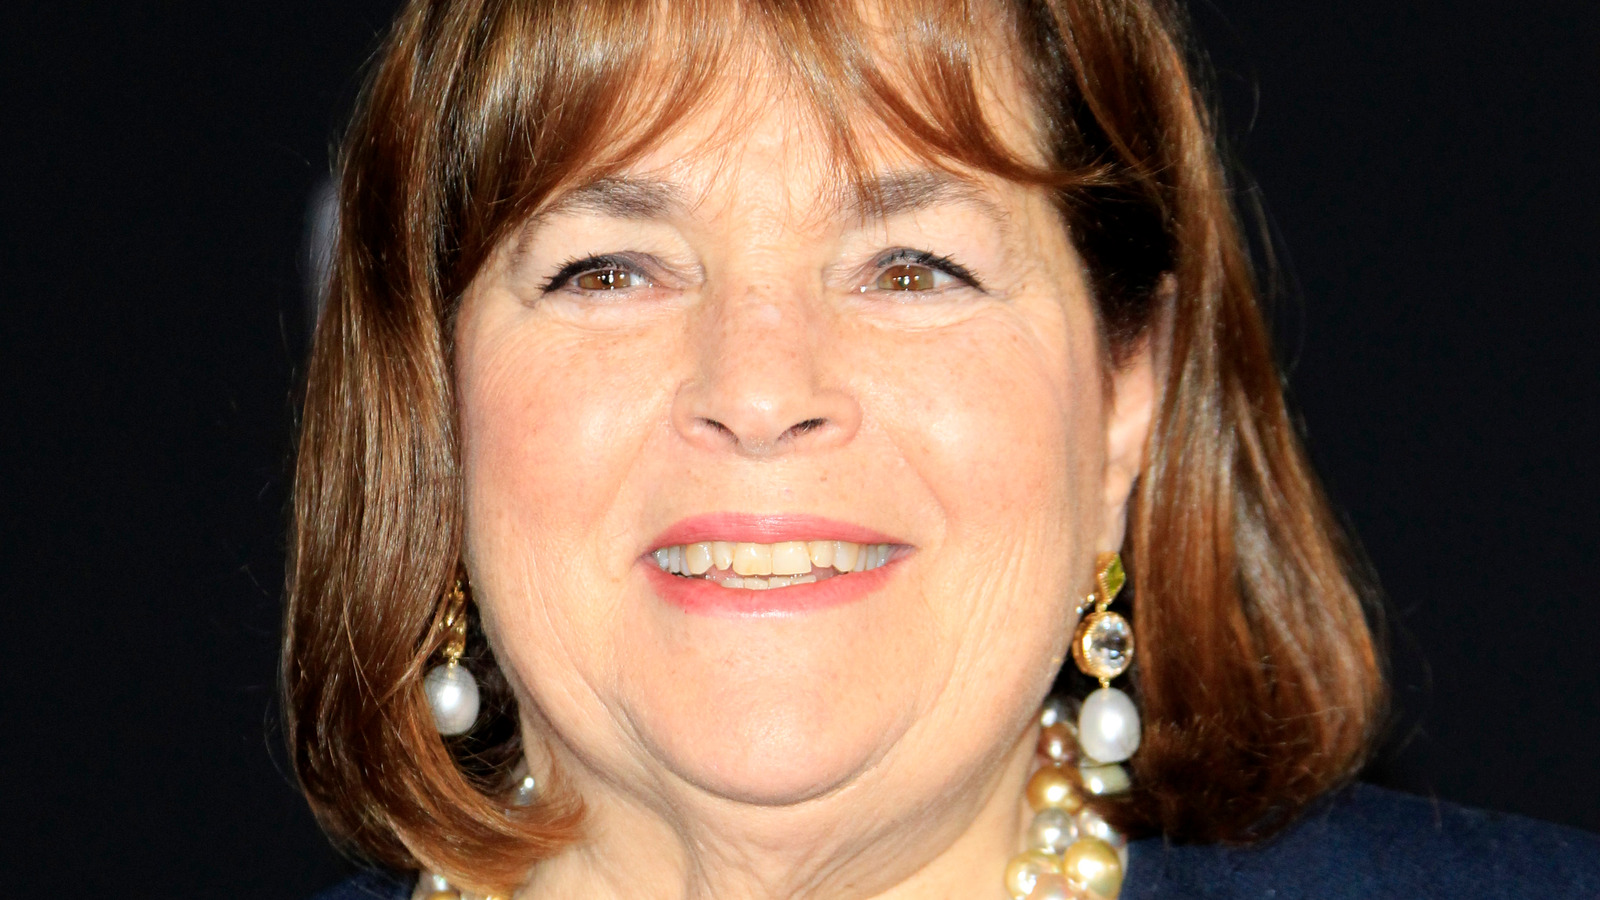 Ina Garten And Williams Sonoma Are Joining Forces To Share Tips For The ...